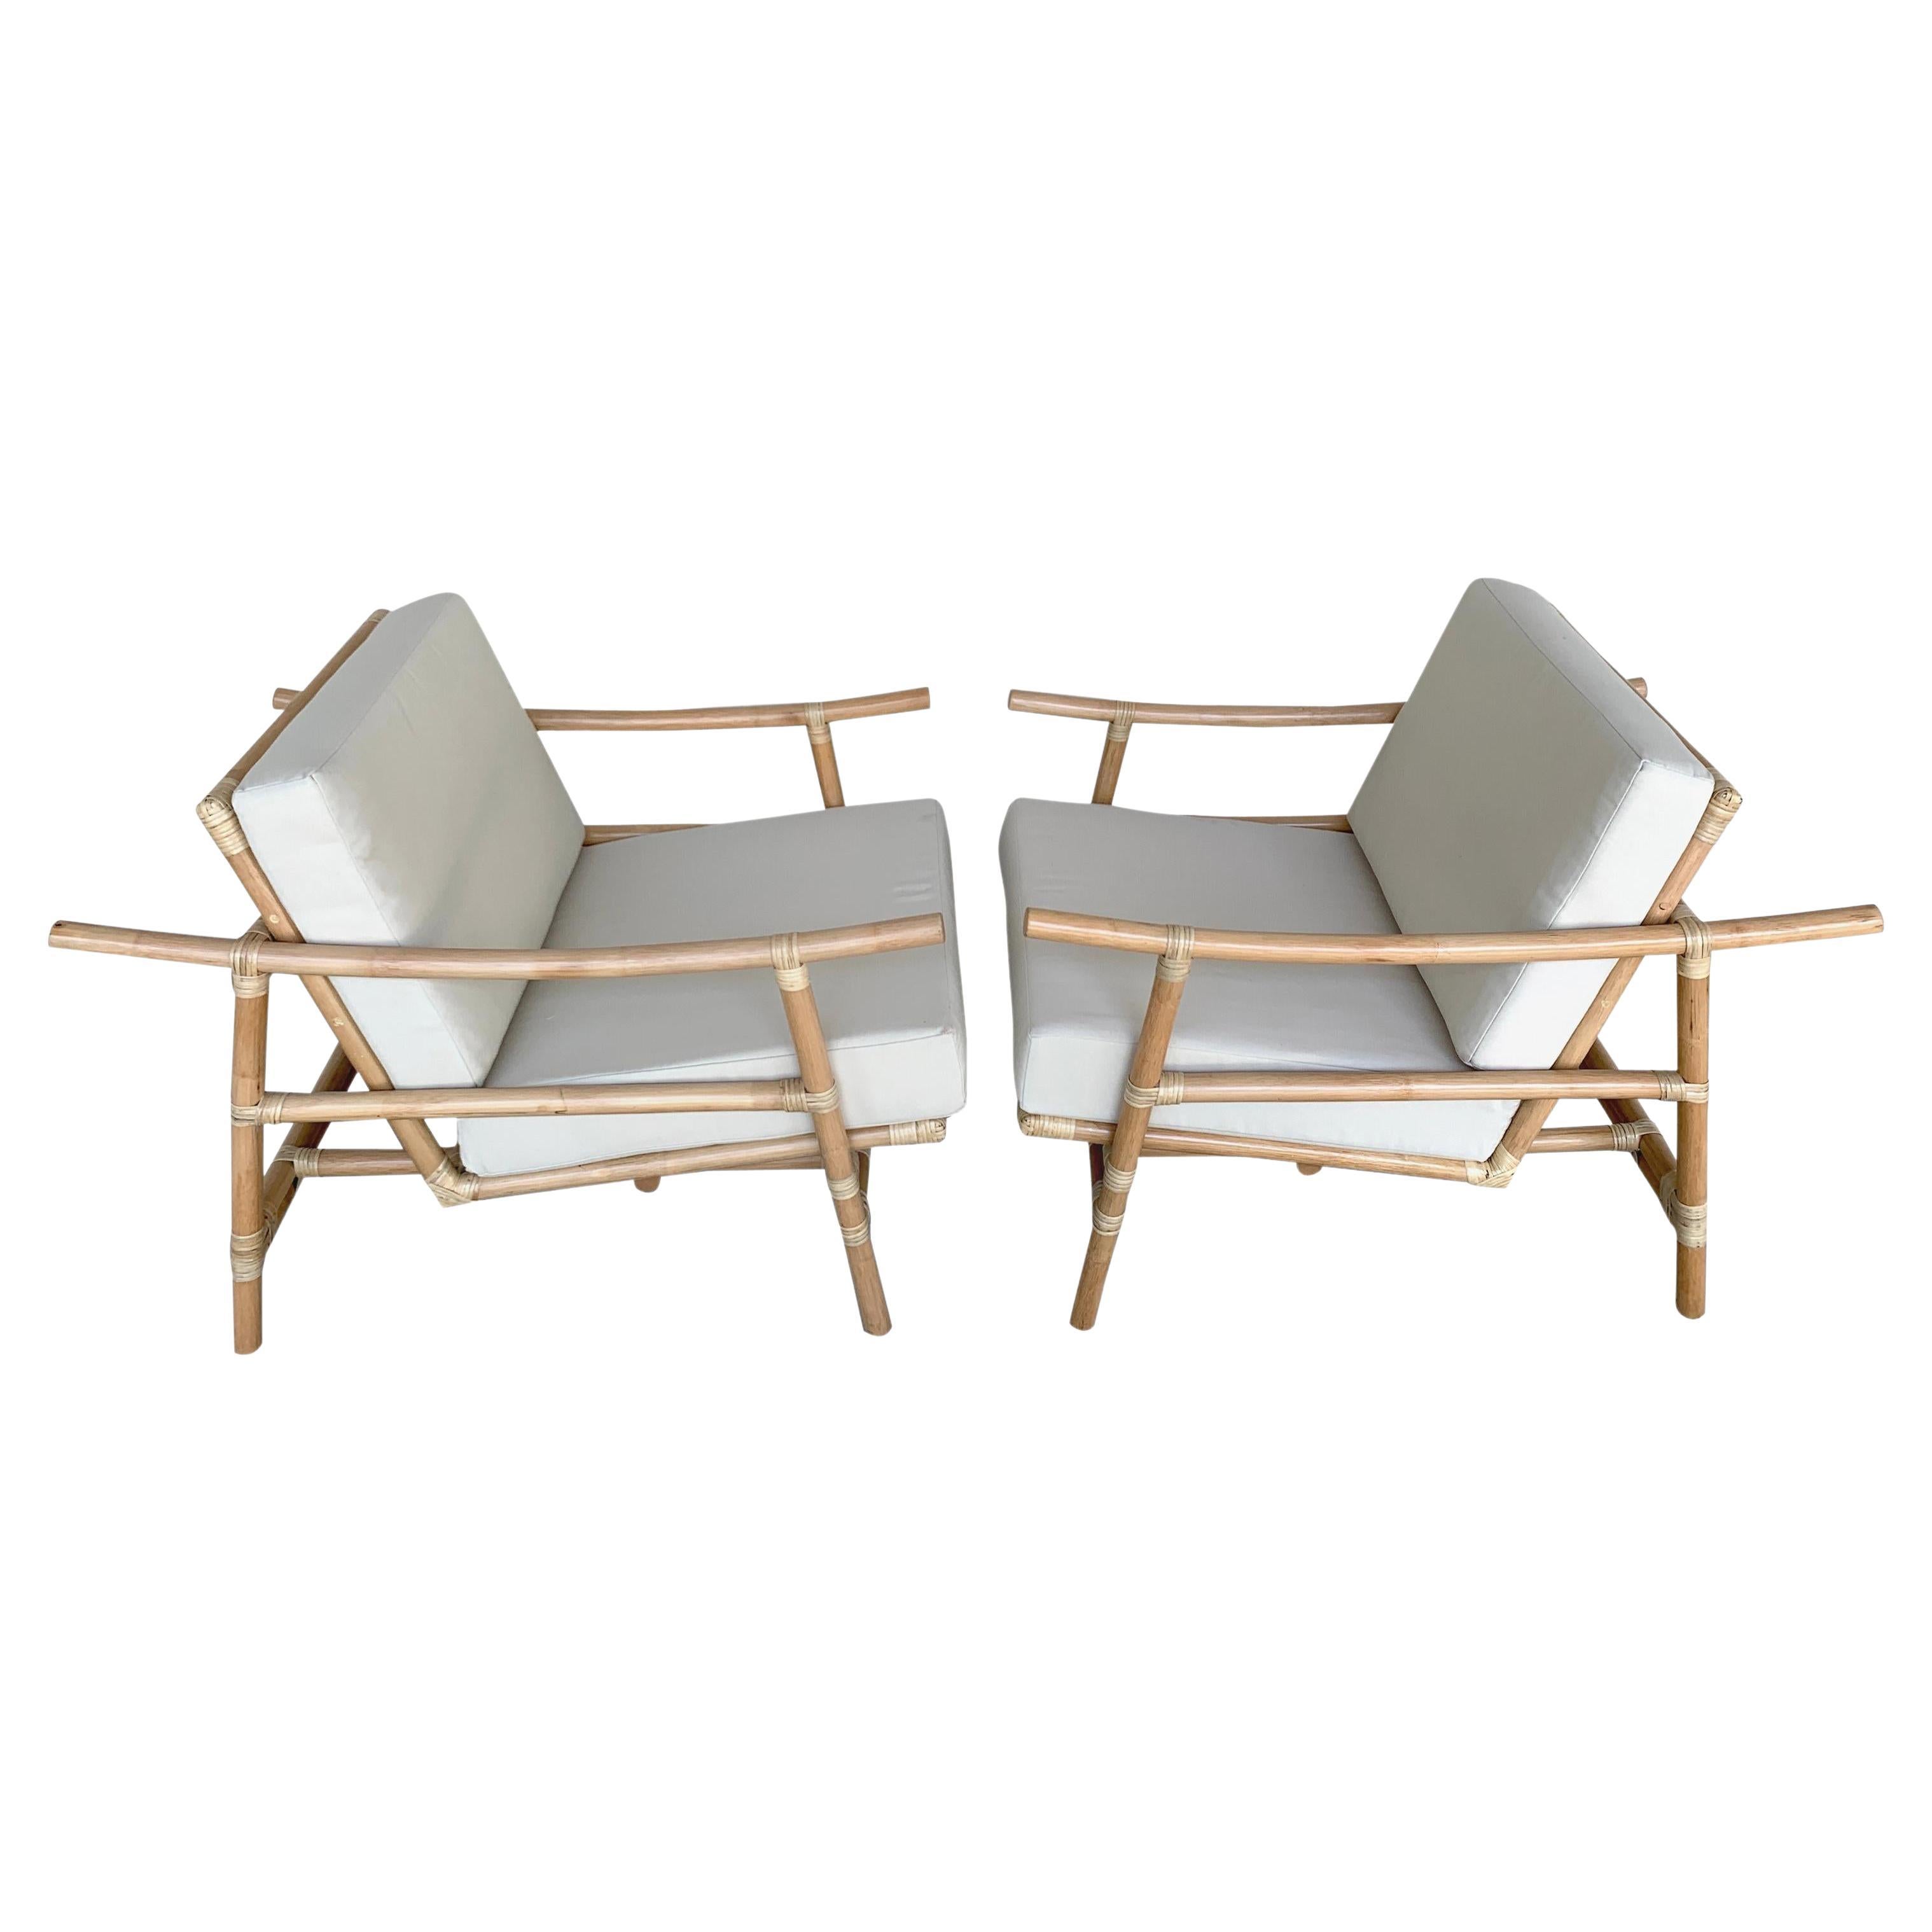 Pair of Ficks Reed Natural Rattan Lounge Club Chairs by John Wisner, Restored